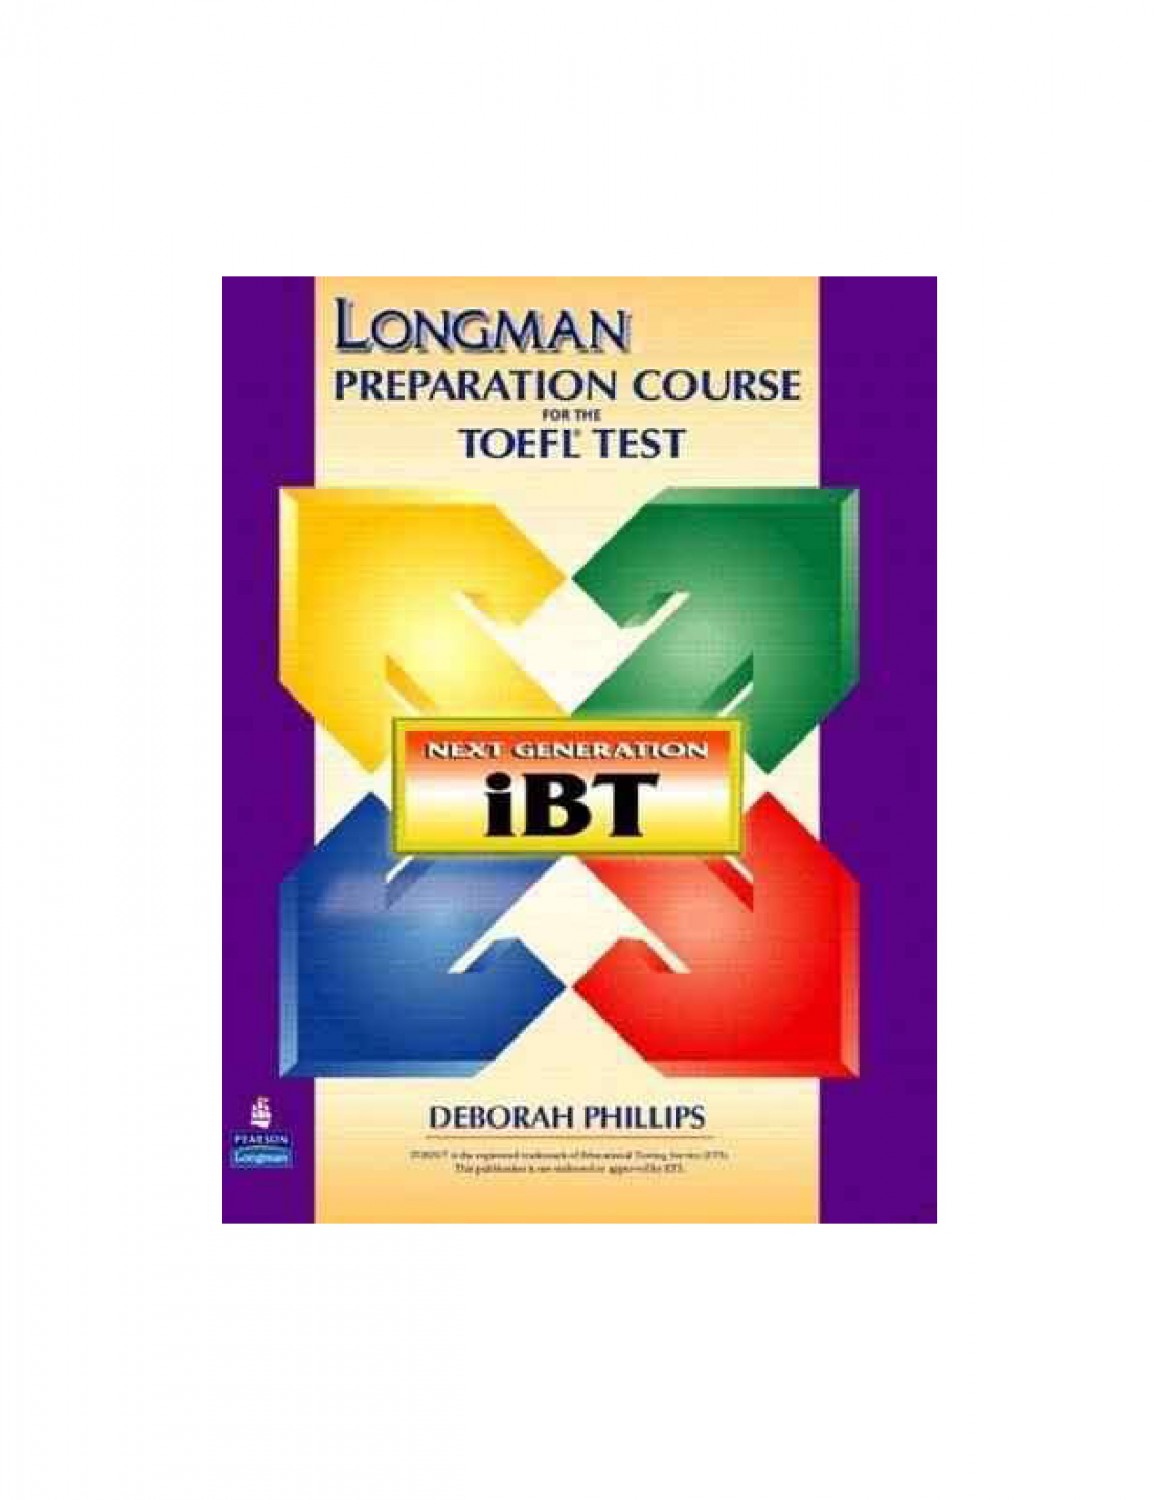 Preparation course for the Toefl test